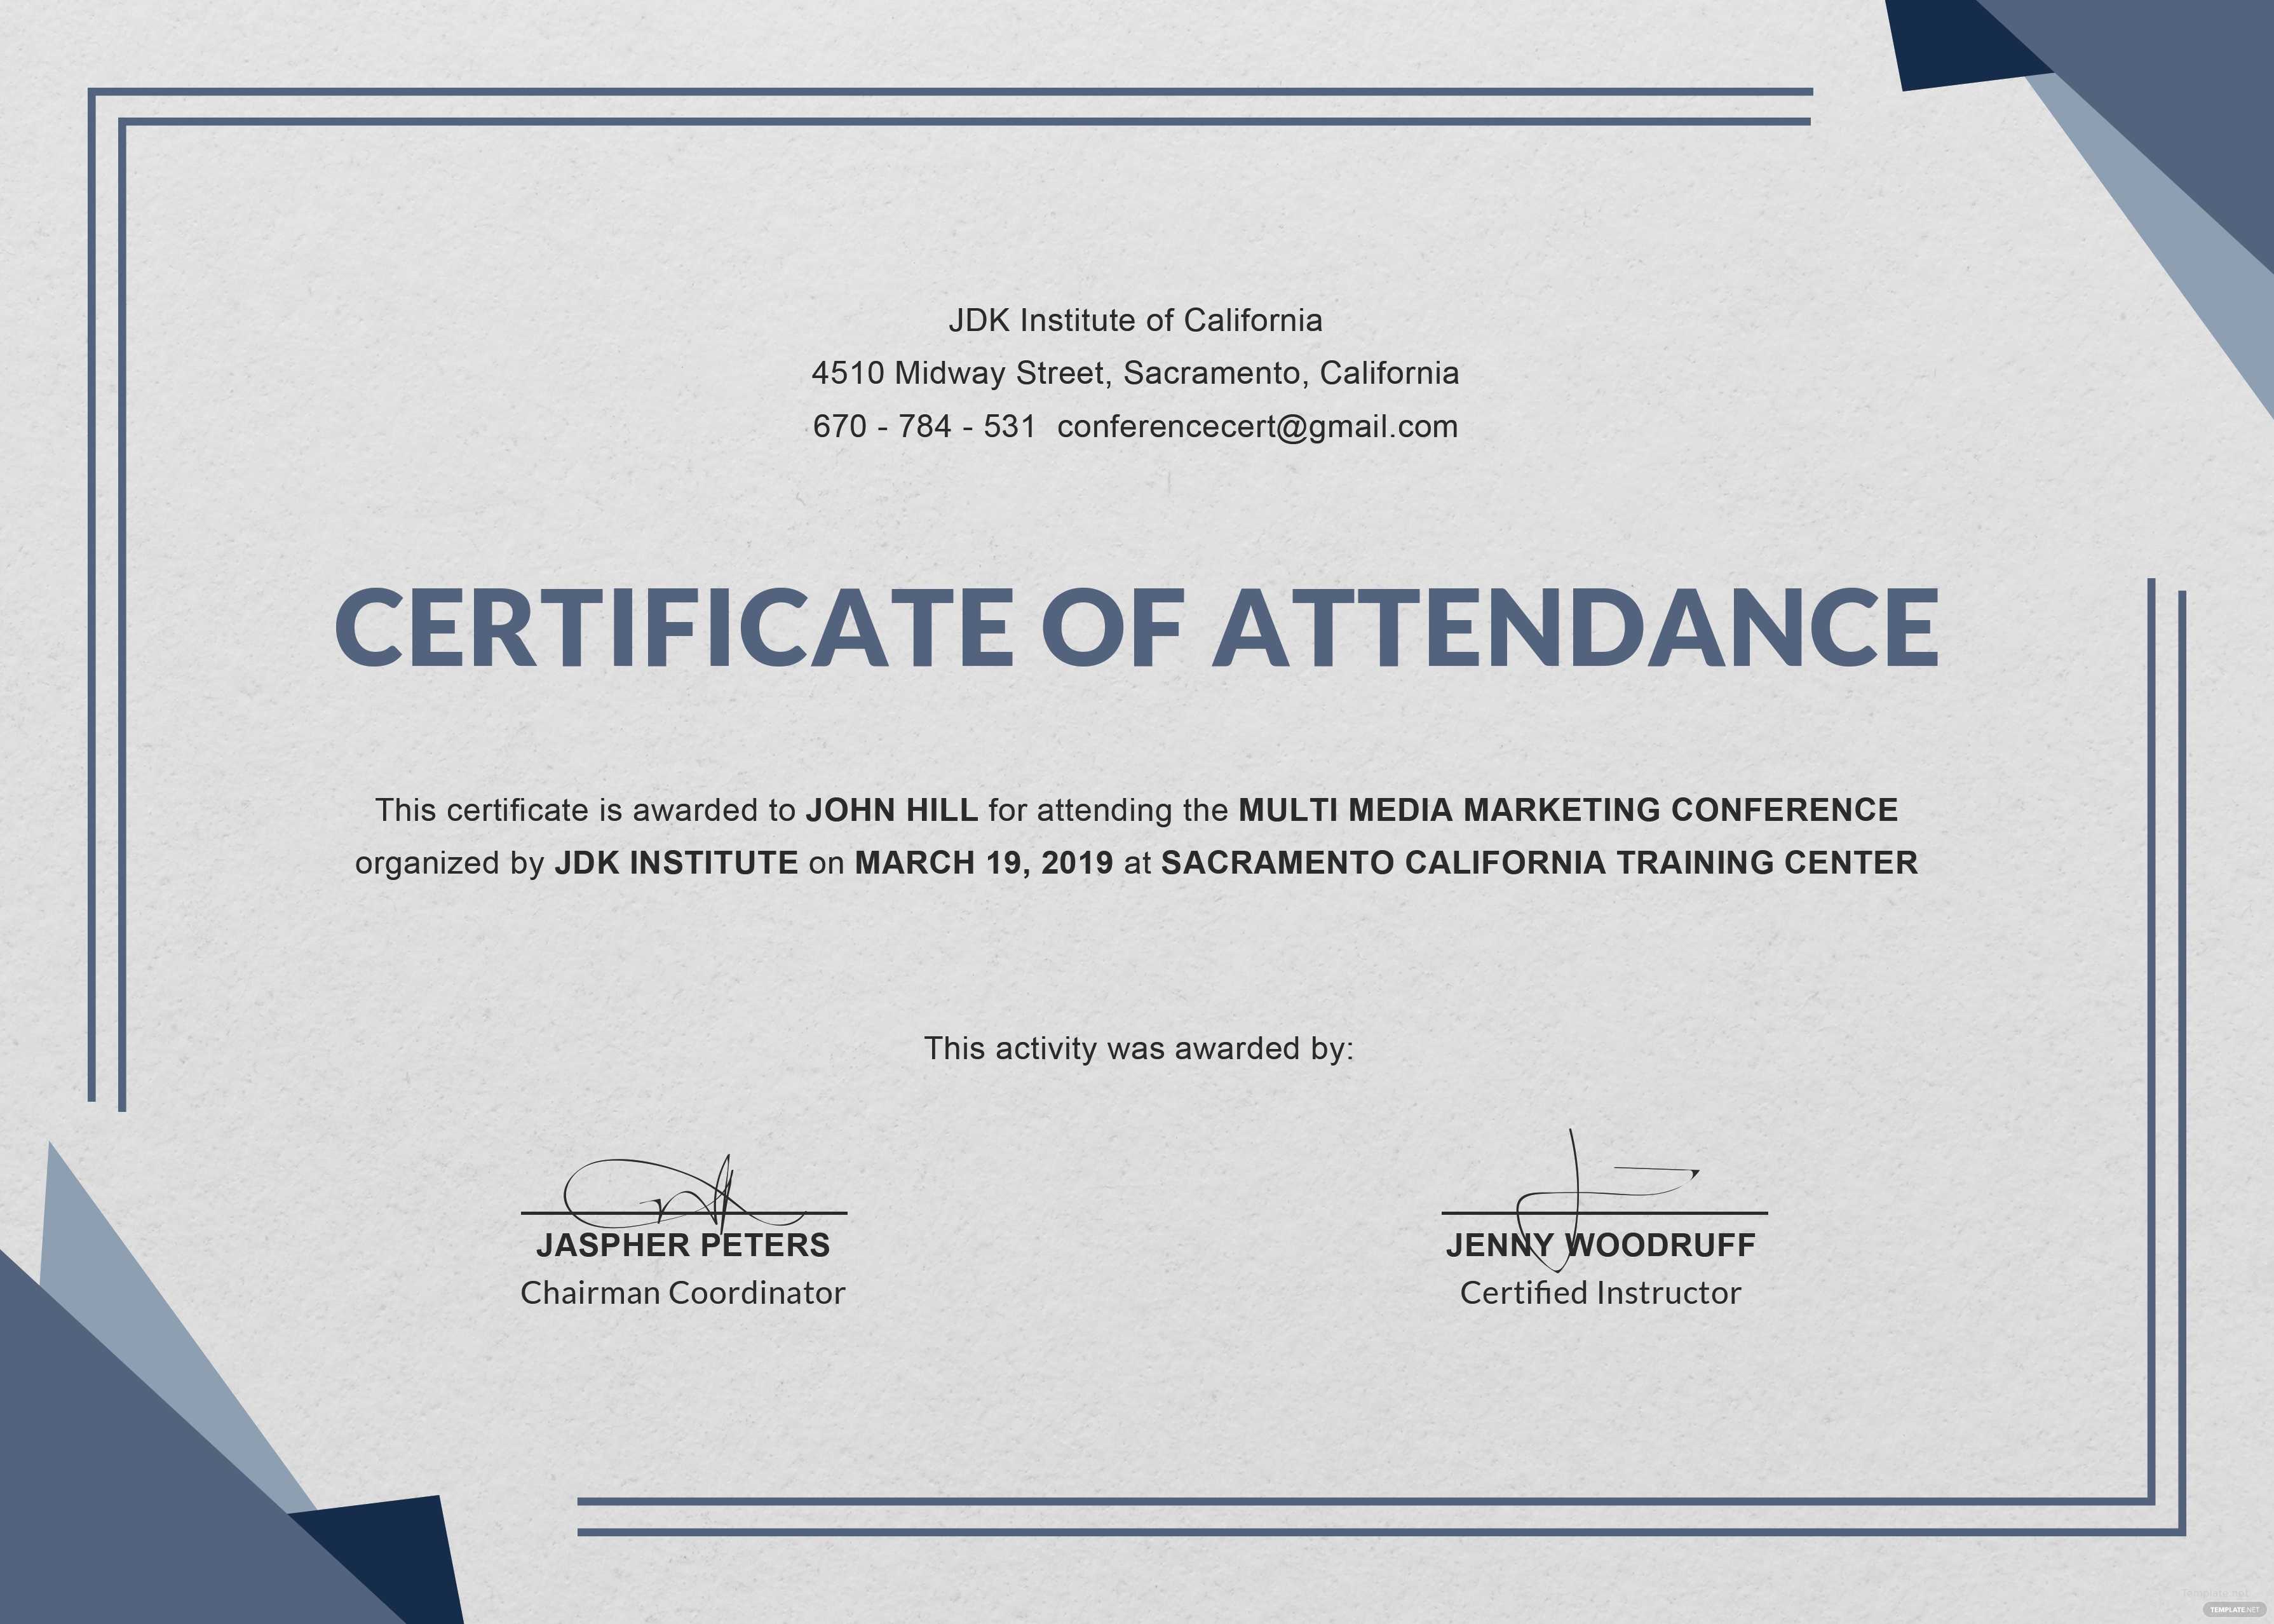 Certificate Templates: Free Conference Attendance Regarding Certificate Of Attendance Conference Template